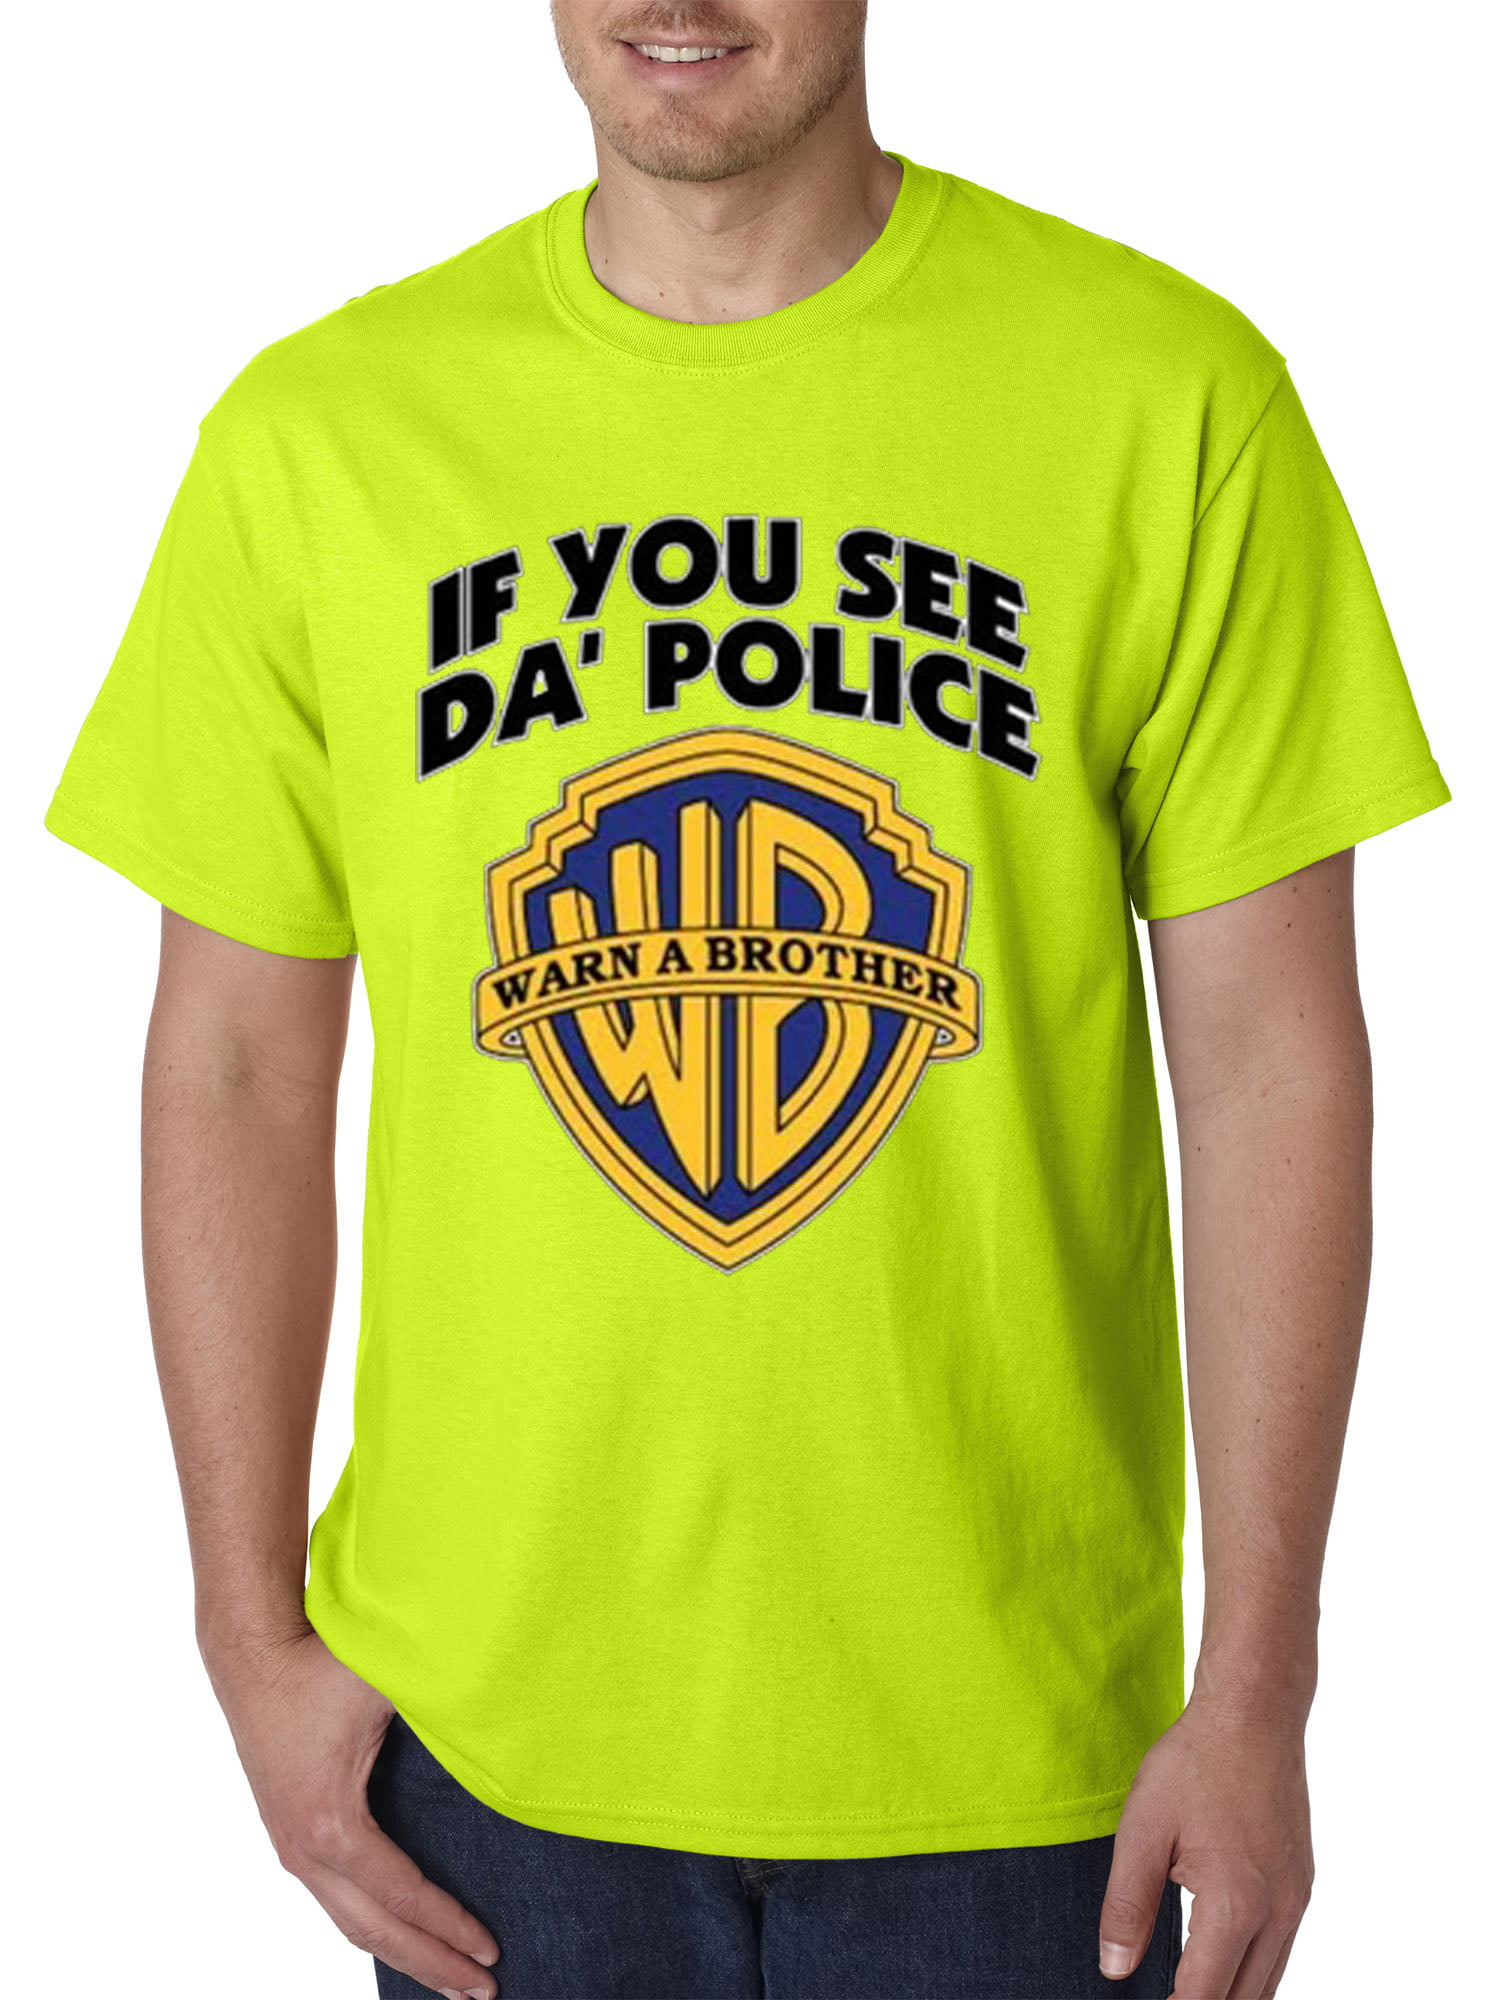 Funny Drinking Graphic T-Shirt IF YOU SEE DA POLICE WARN A BROTHER Printed Tee